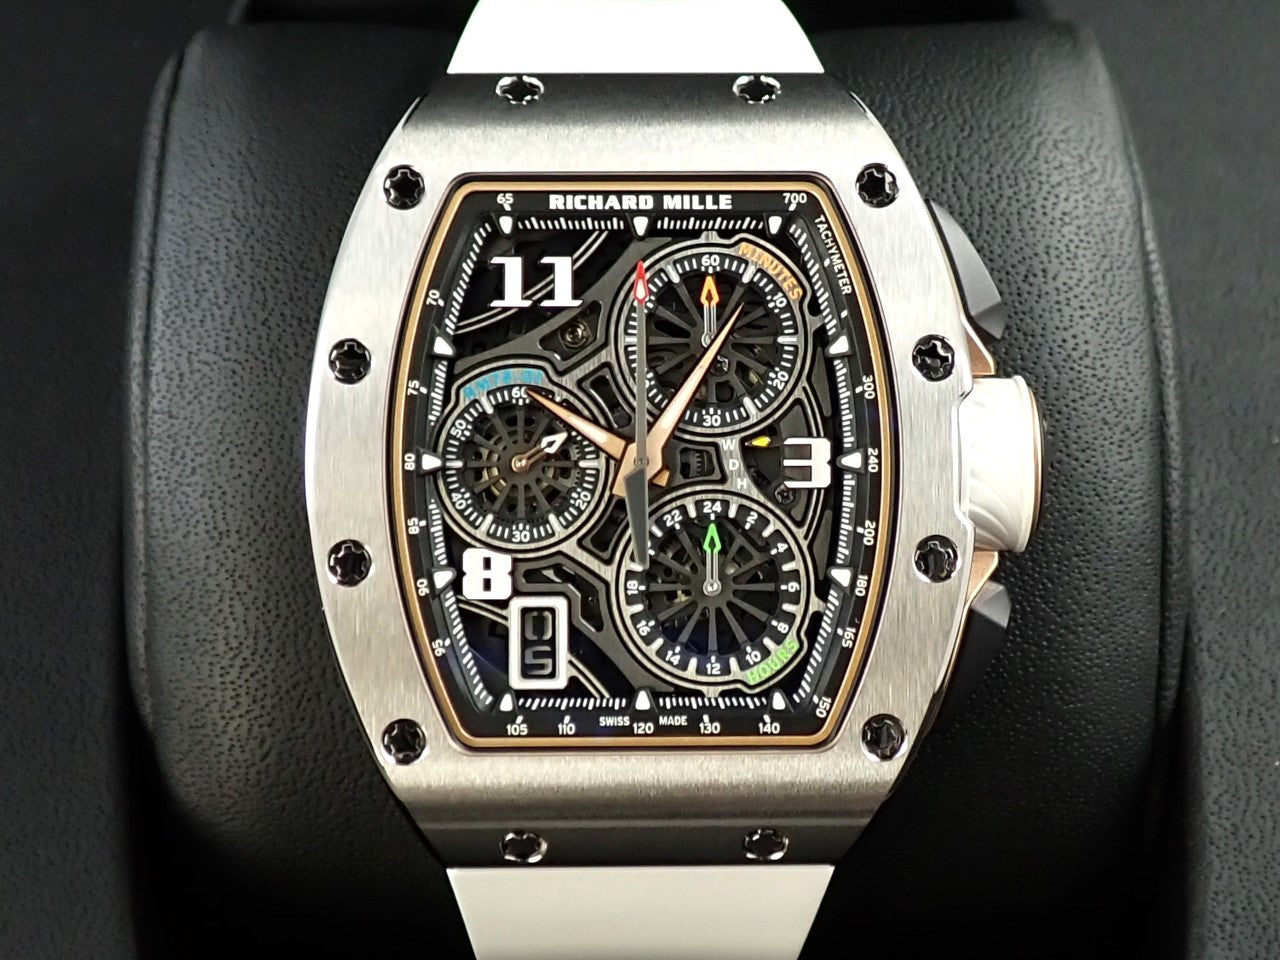 Richard Mille Automatic Flyback Chronograph &lt;Warranty, Box, etc.&gt;